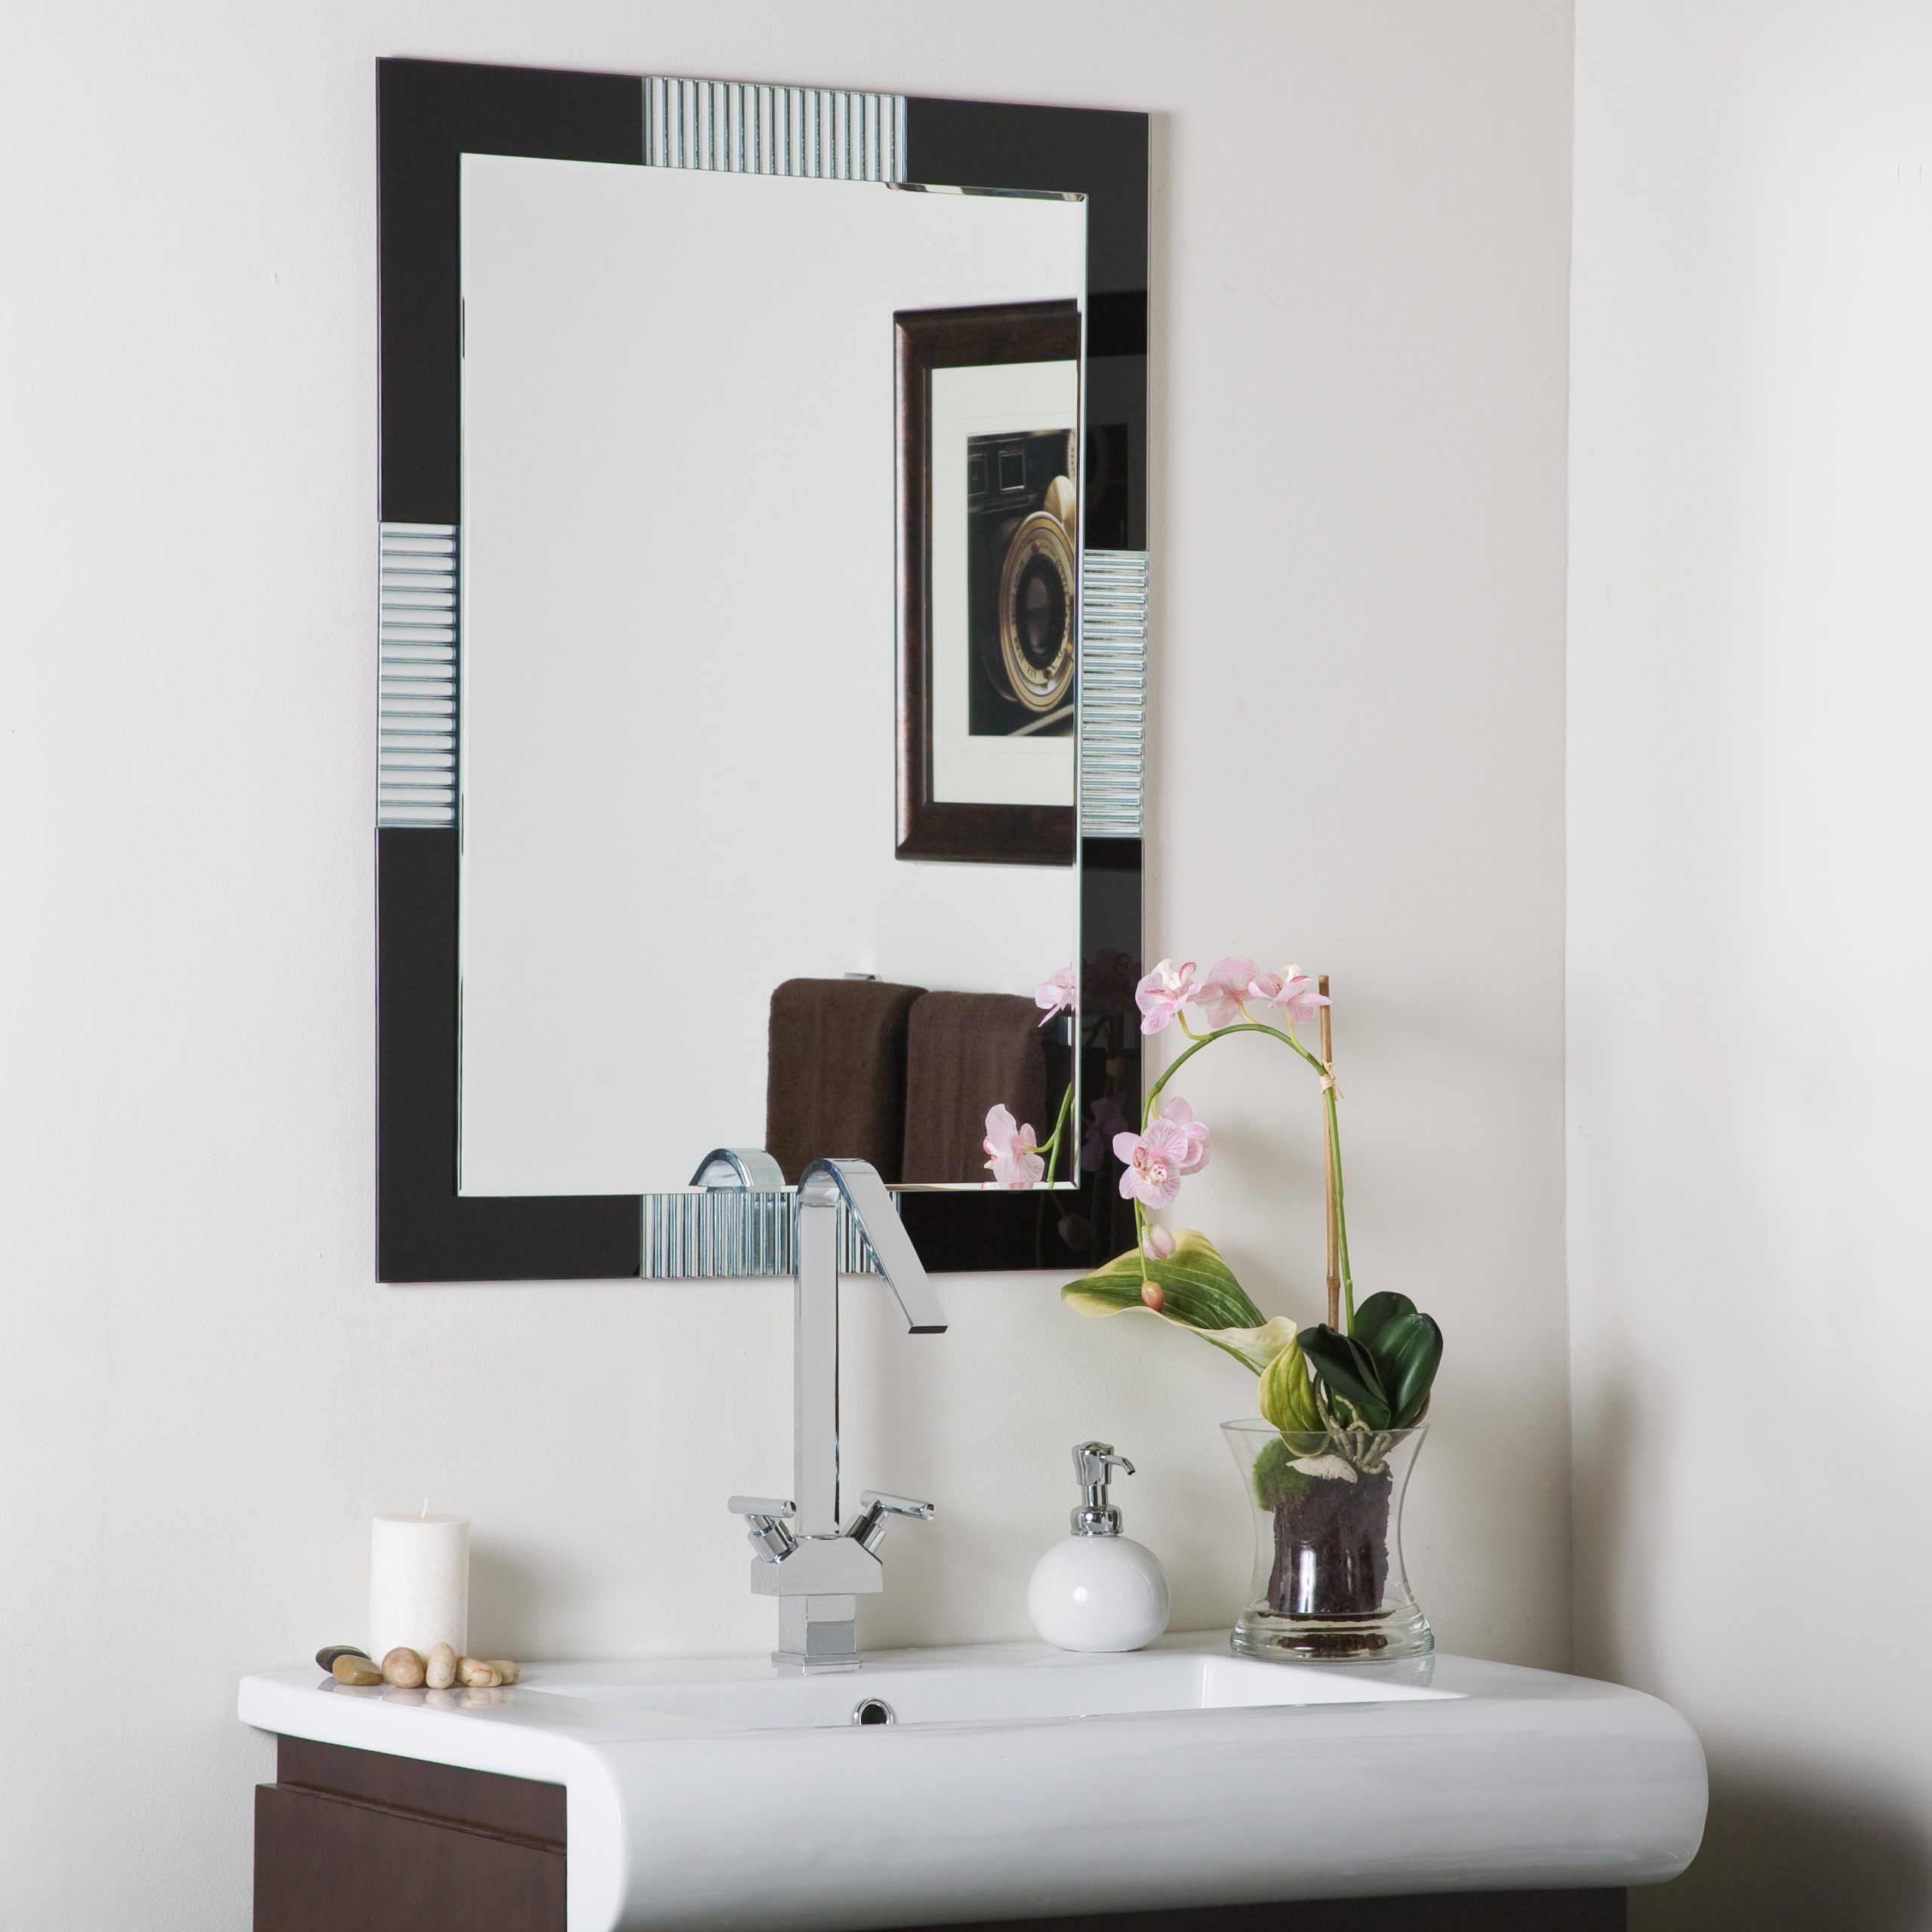 Decor Wonderland Francisco Bathroom Frameless Wall Mirror, Large Intended For Large Frameless Wall Mirrors (View 2 of 15)